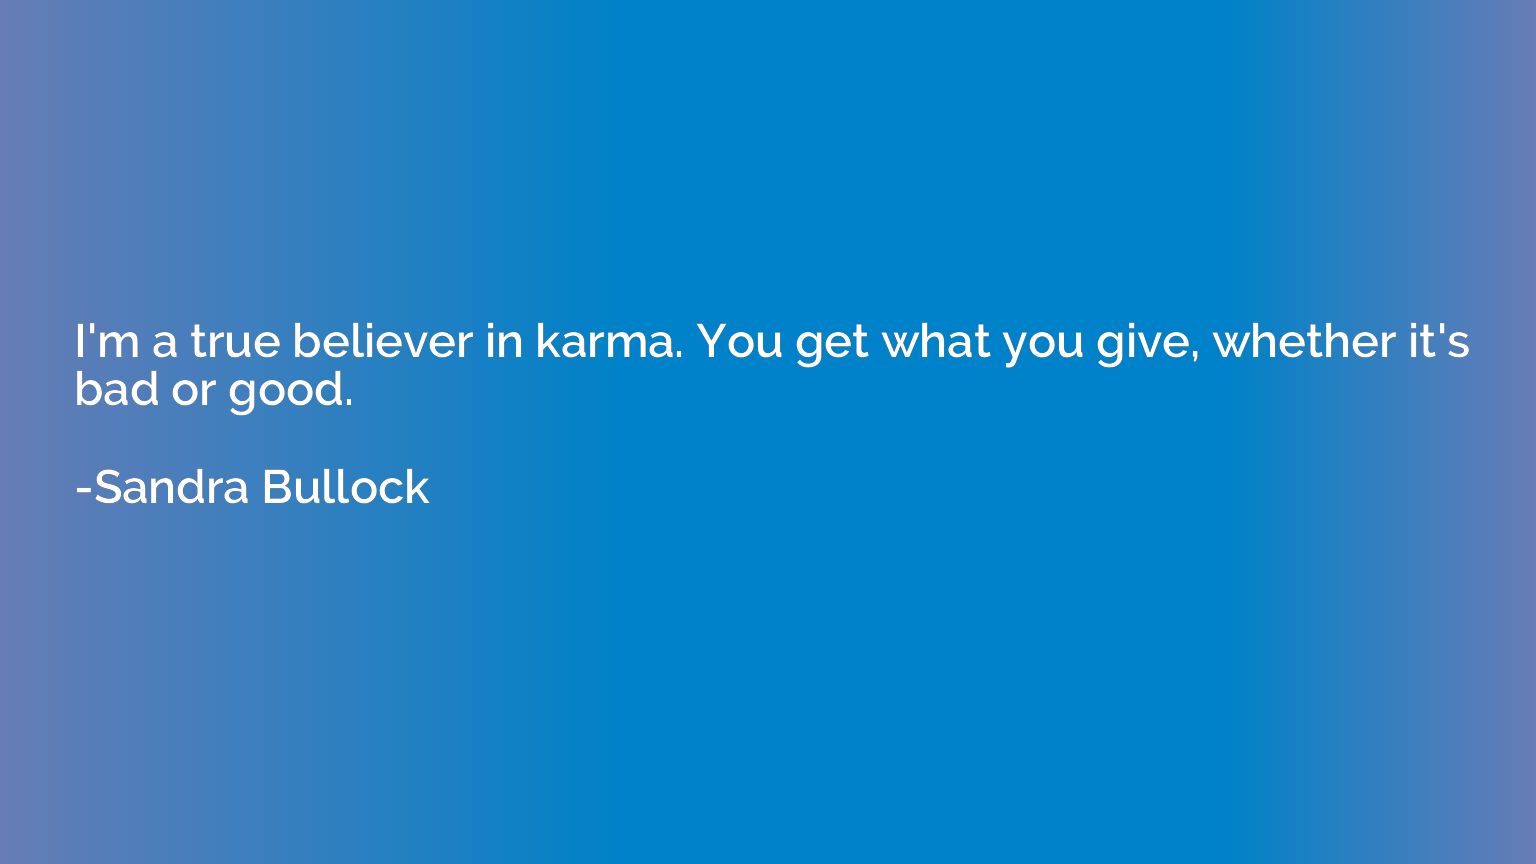 I'm a true believer in karma. You get what you give, whether